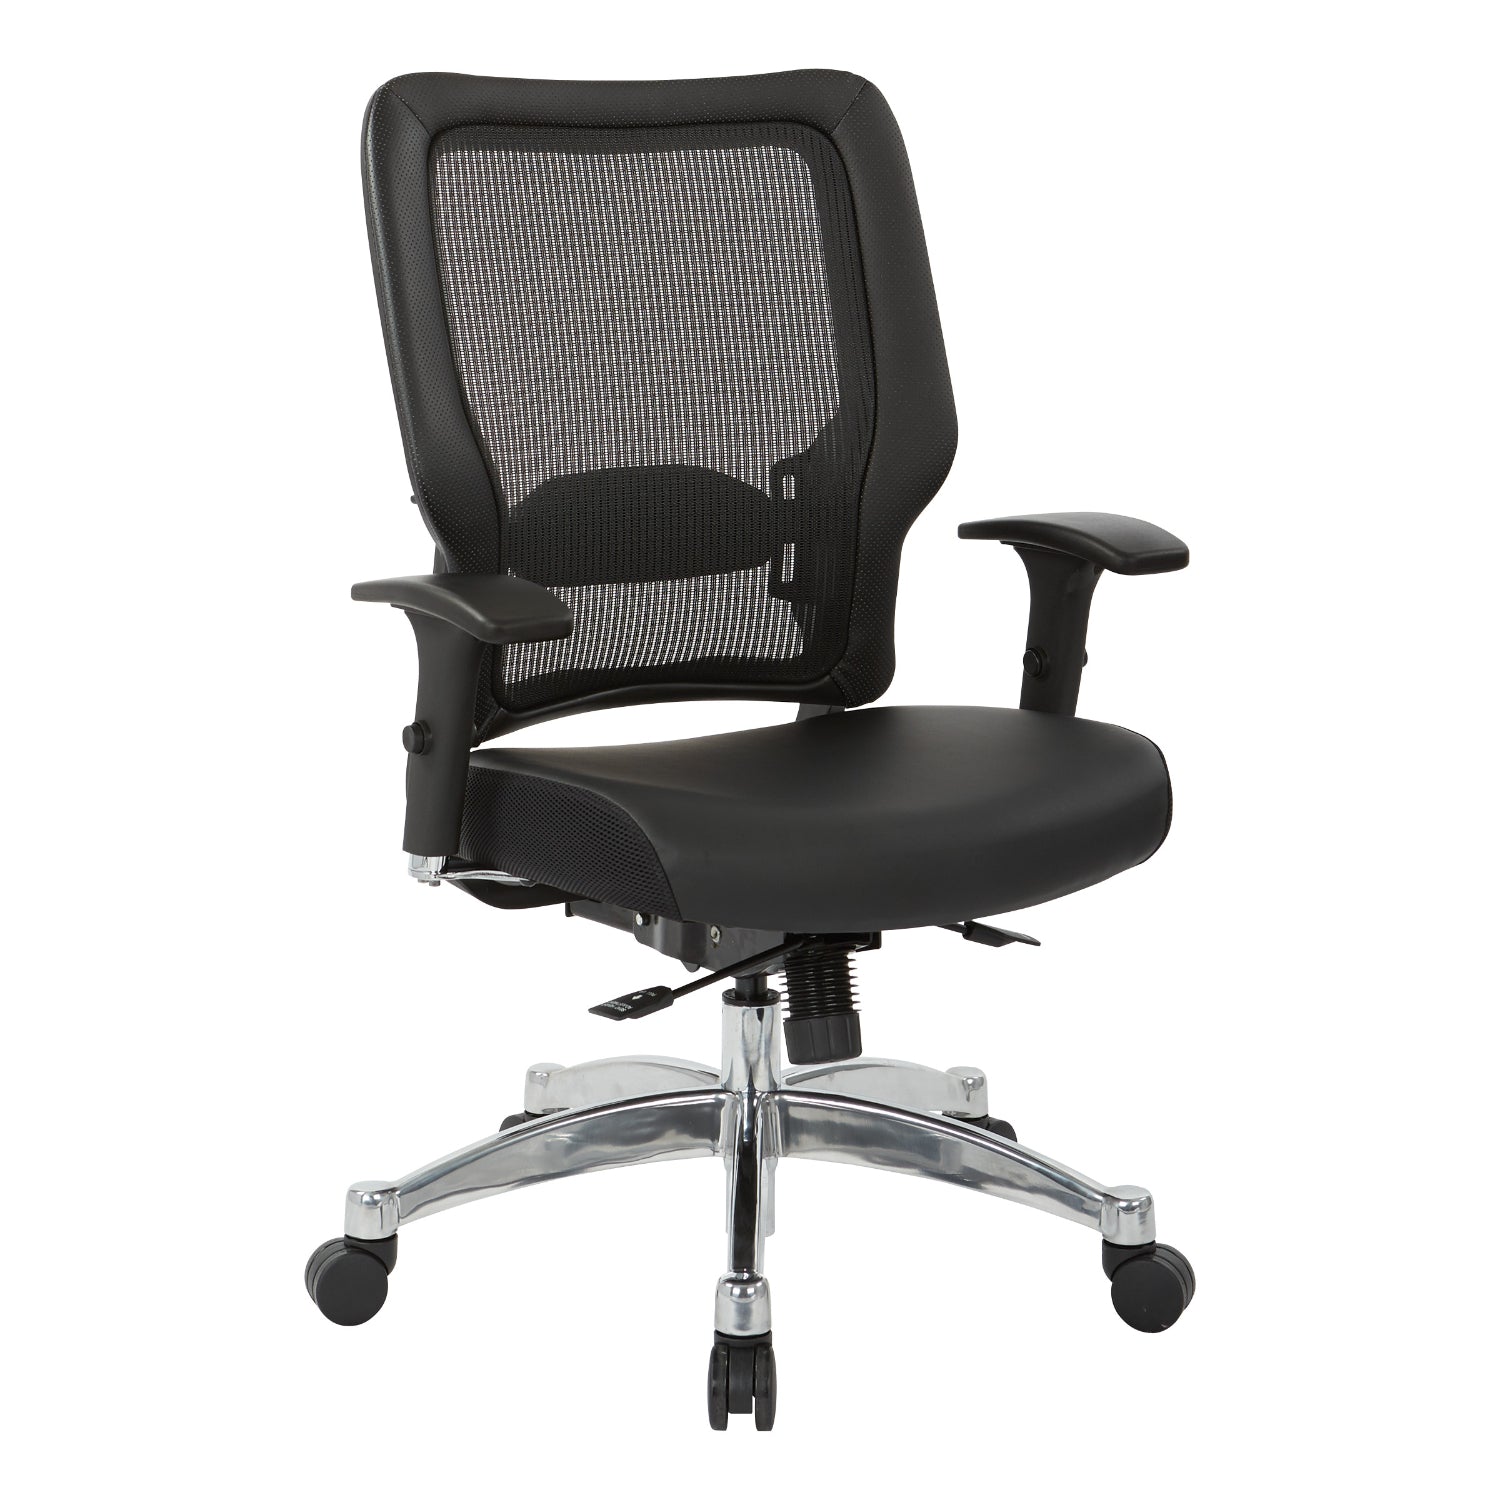 Black Vertical Mesh Back Manager's Chair with Black Bonded Leather Seat, Height Adjustable Chrome Arms, Height and Depth Adjustable Lumbar Support and Polished Aluminum Base